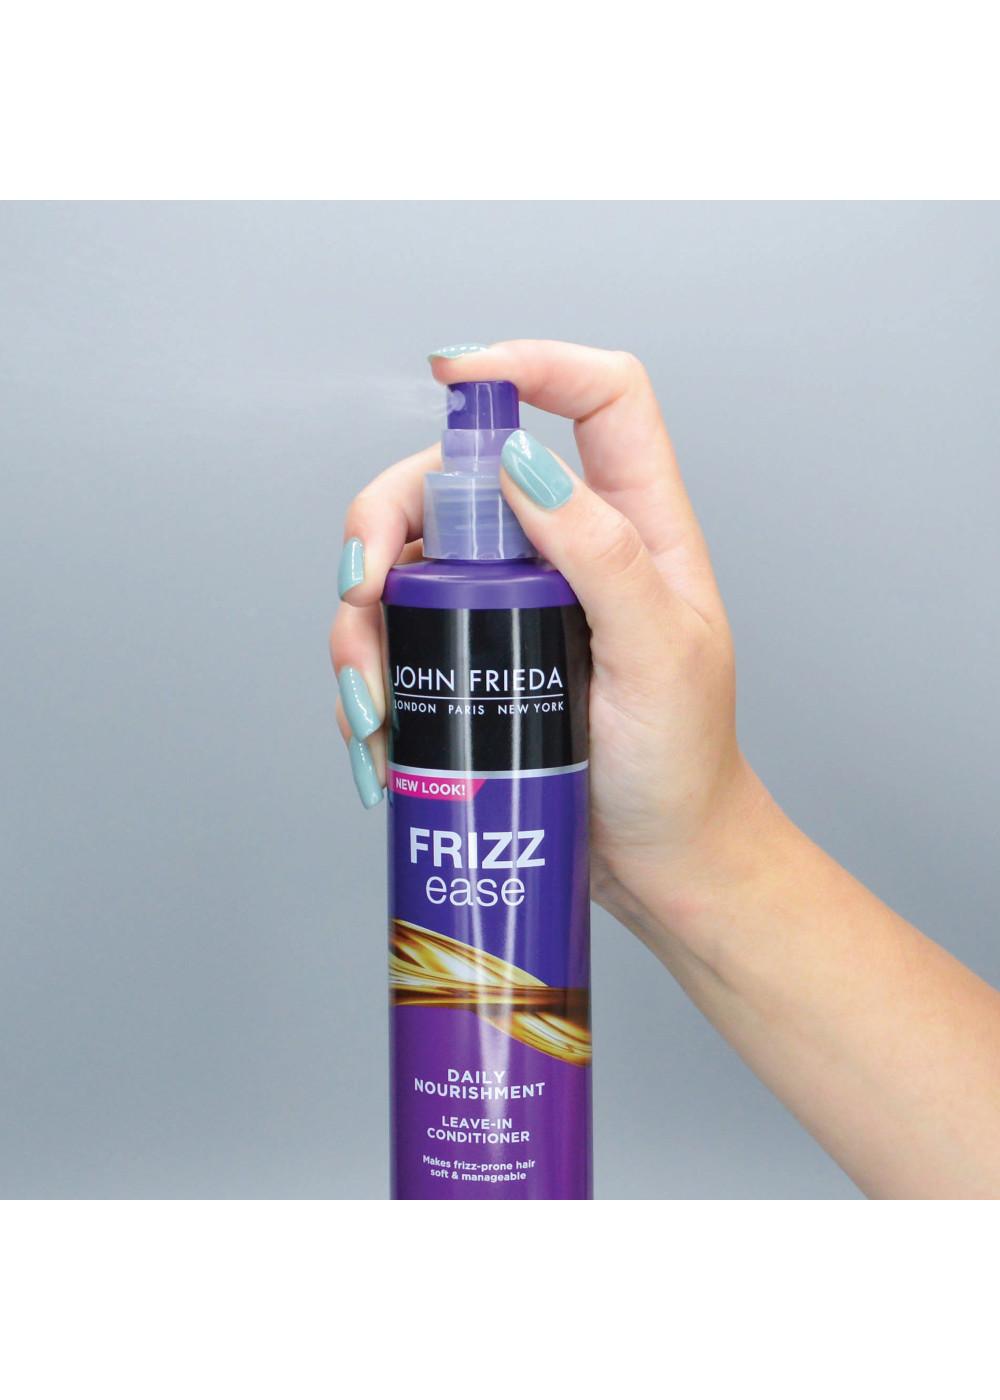 John Frieda Frizz Ease Daily Nourishment Leave-In Conditioner; image 9 of 9